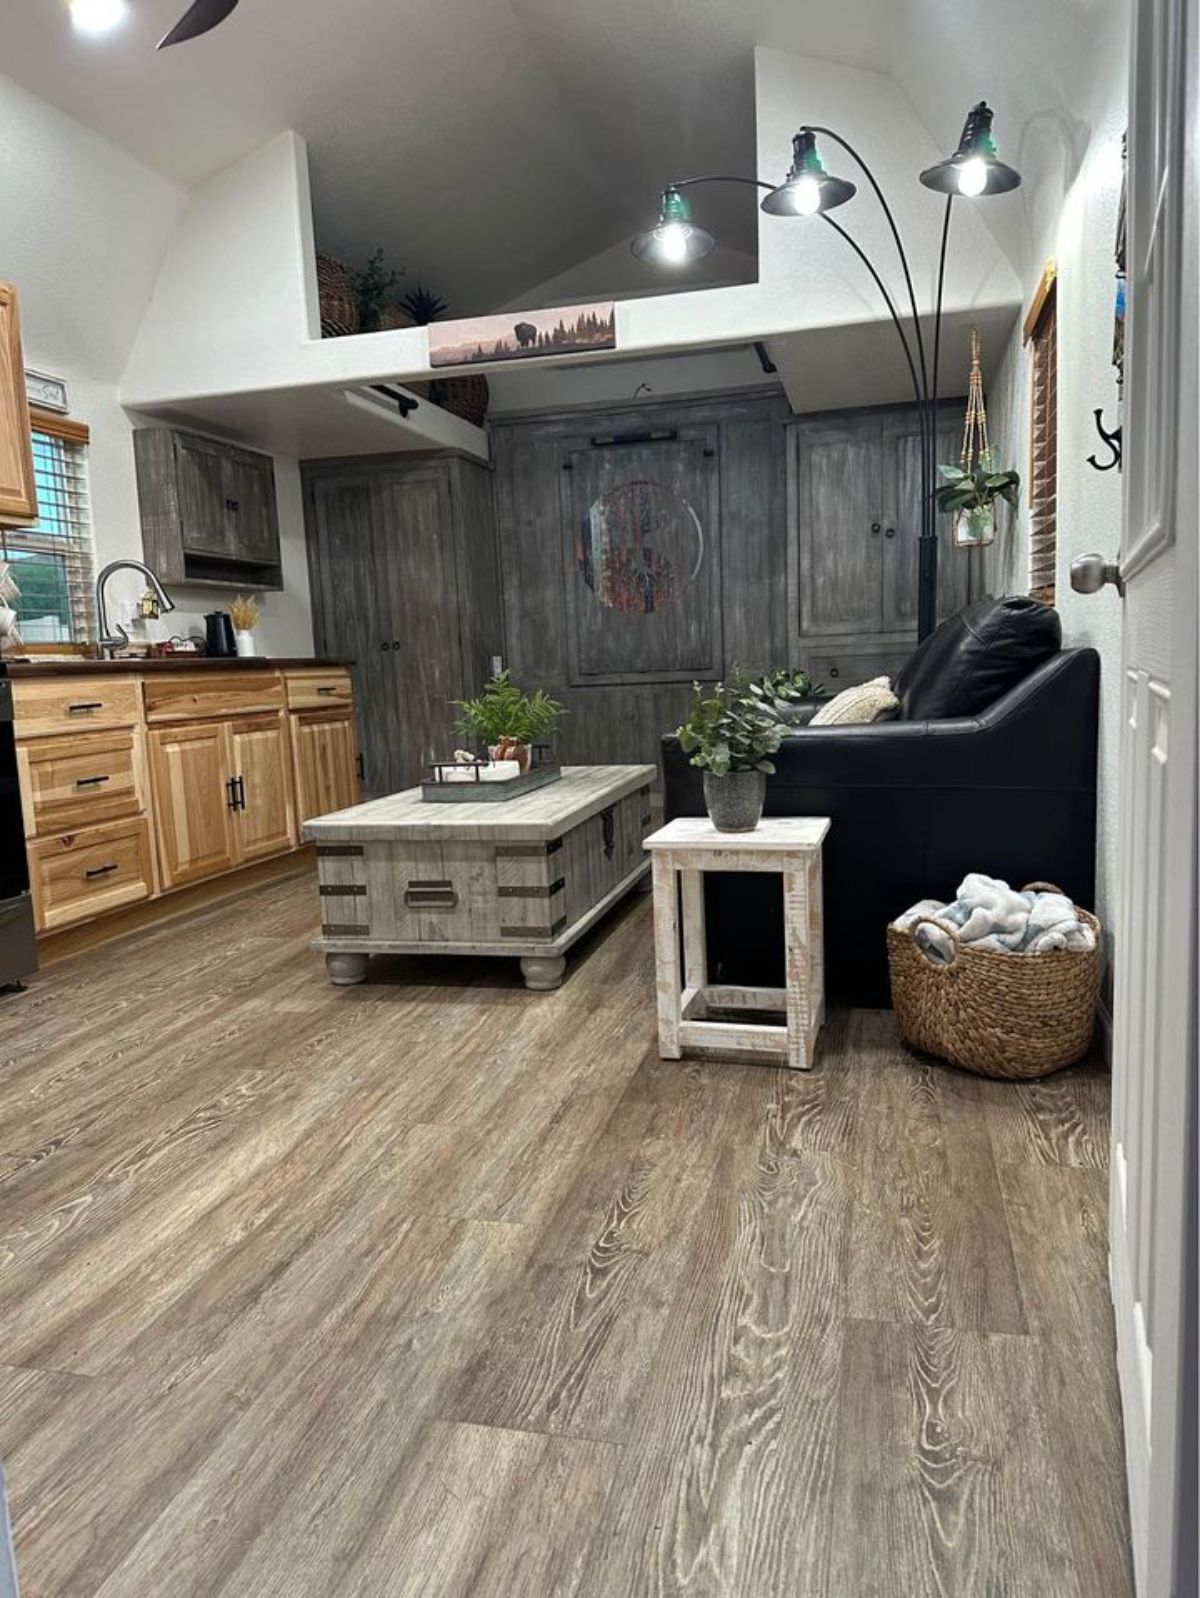 wooden flooring and living area of 32’ tiny house